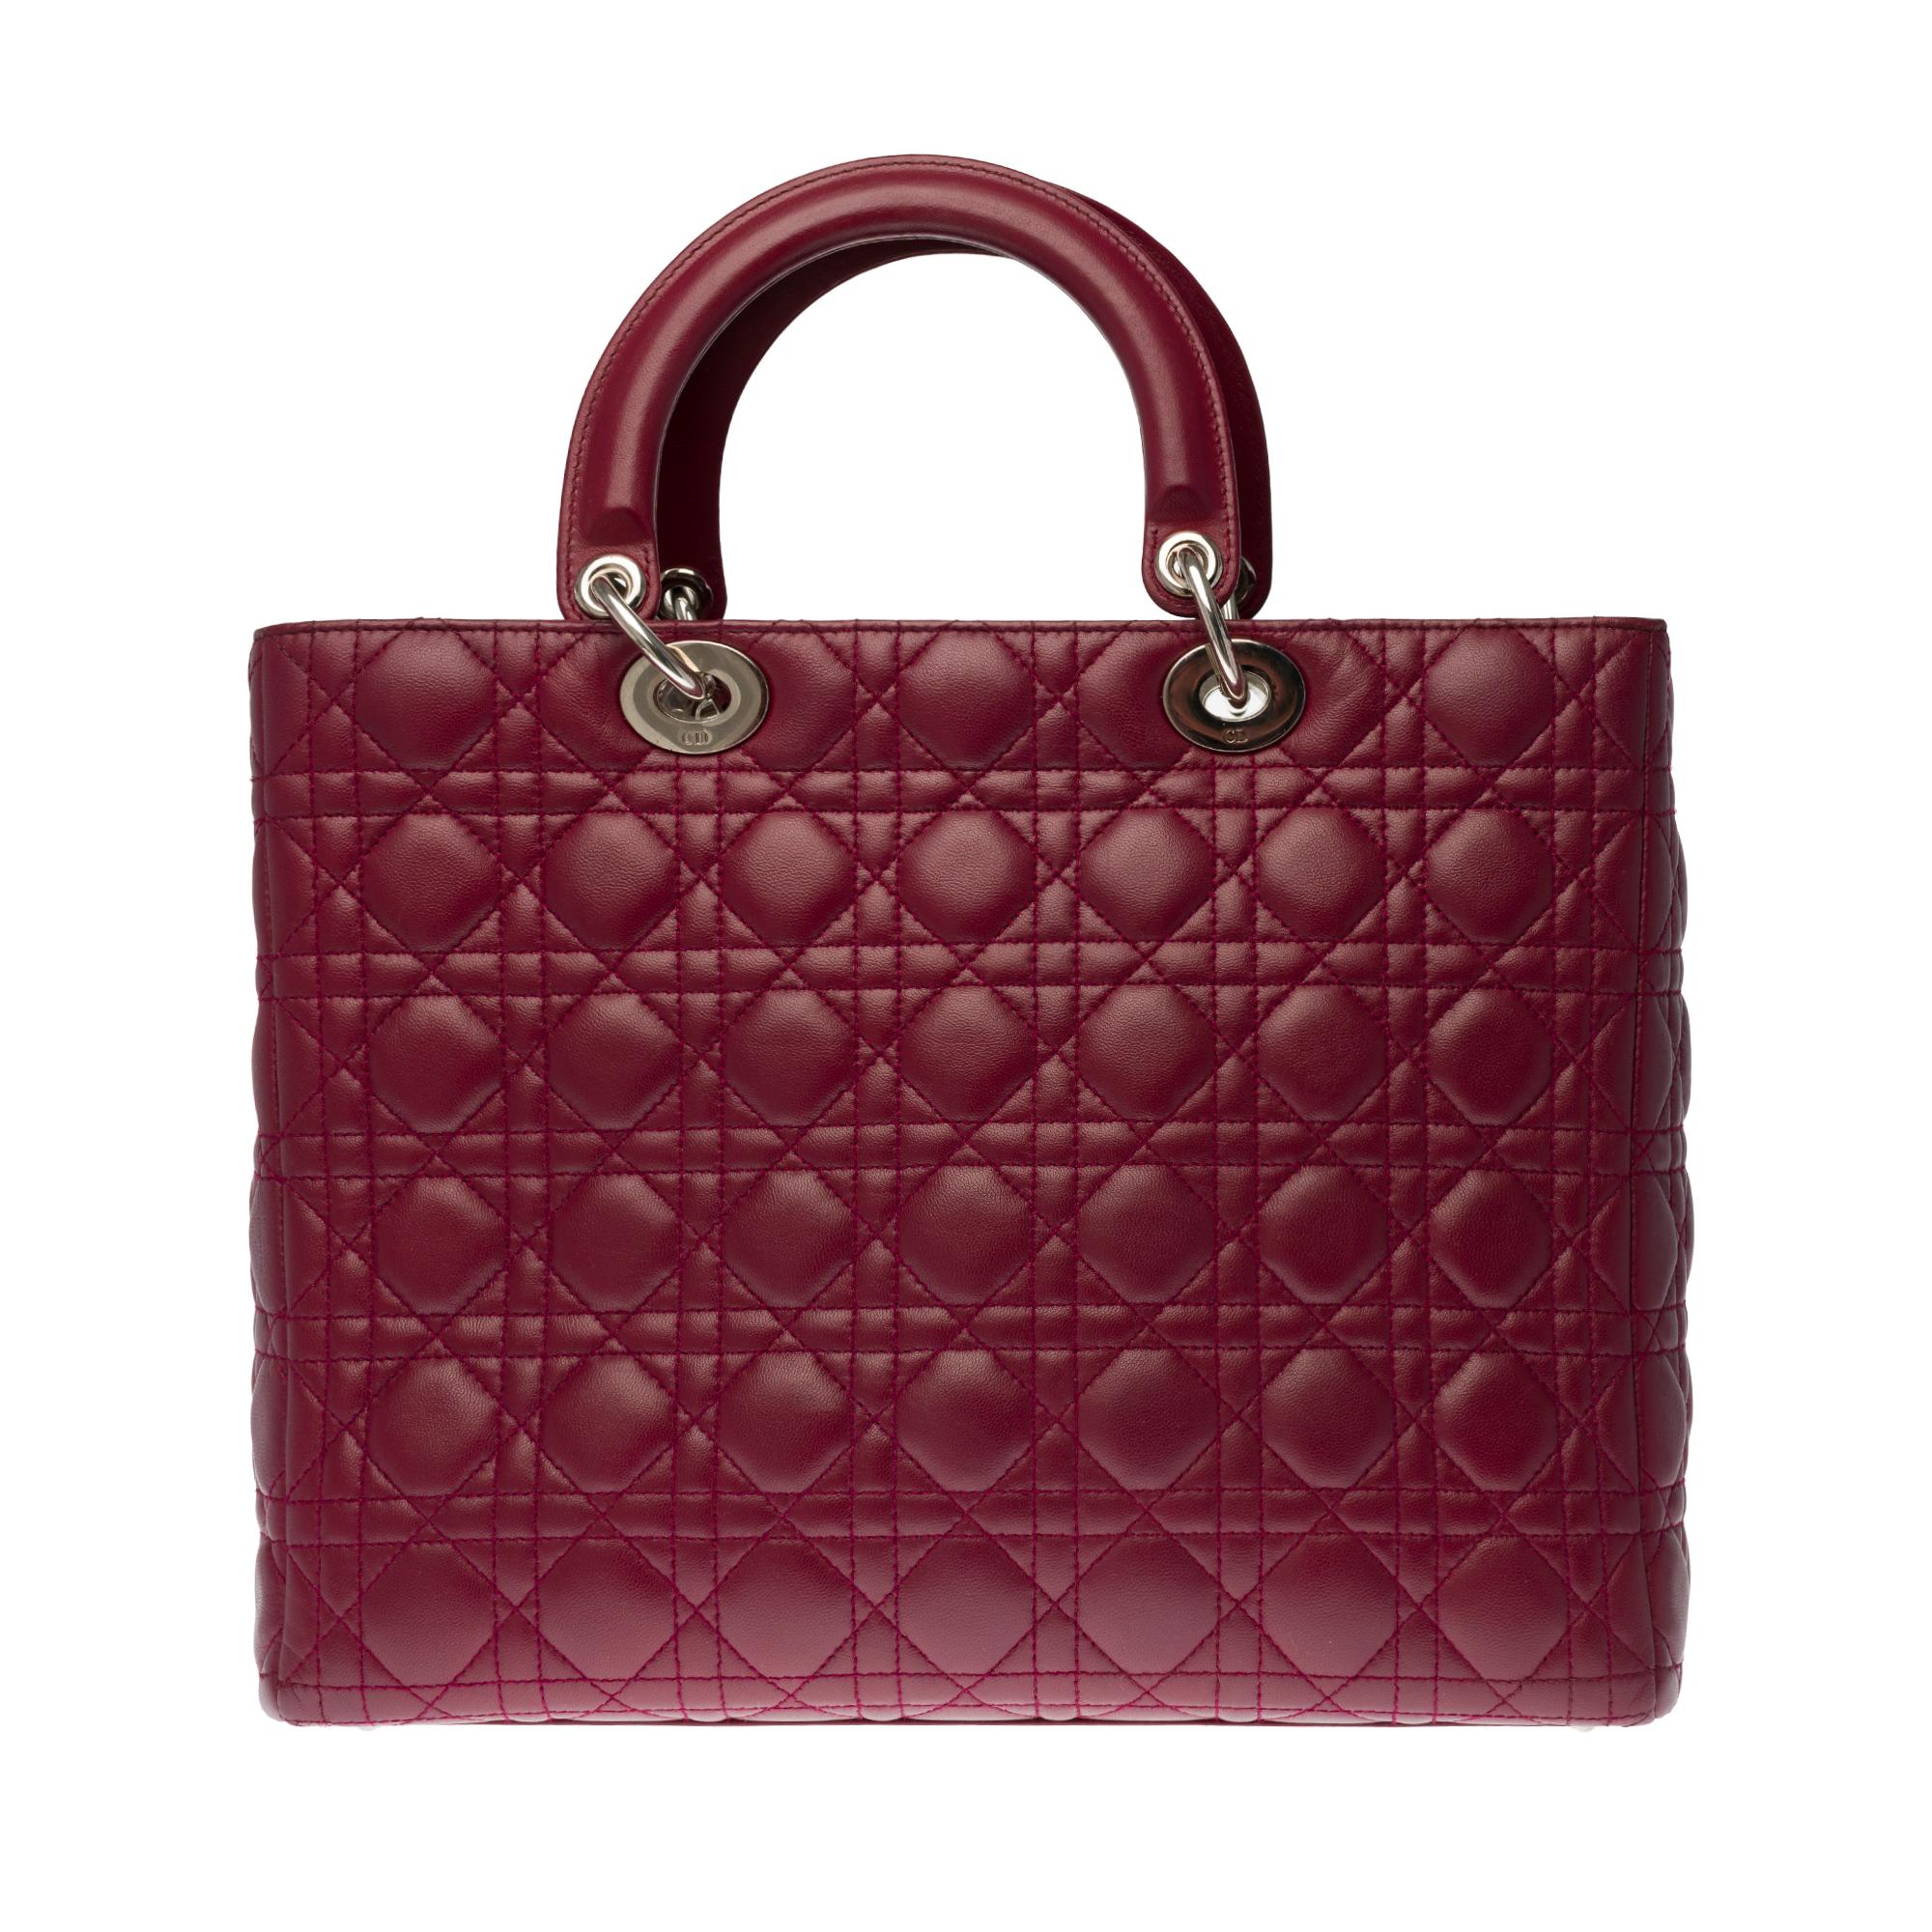 Very chic Dior Lady Dior large size (GM) shoulder bag in plum leather, silver metal hardware, double handle in plum leather, removable shoulder strap handle in plum leather allowing a hand or shoulder support or shoulder strap.

It’s a zip